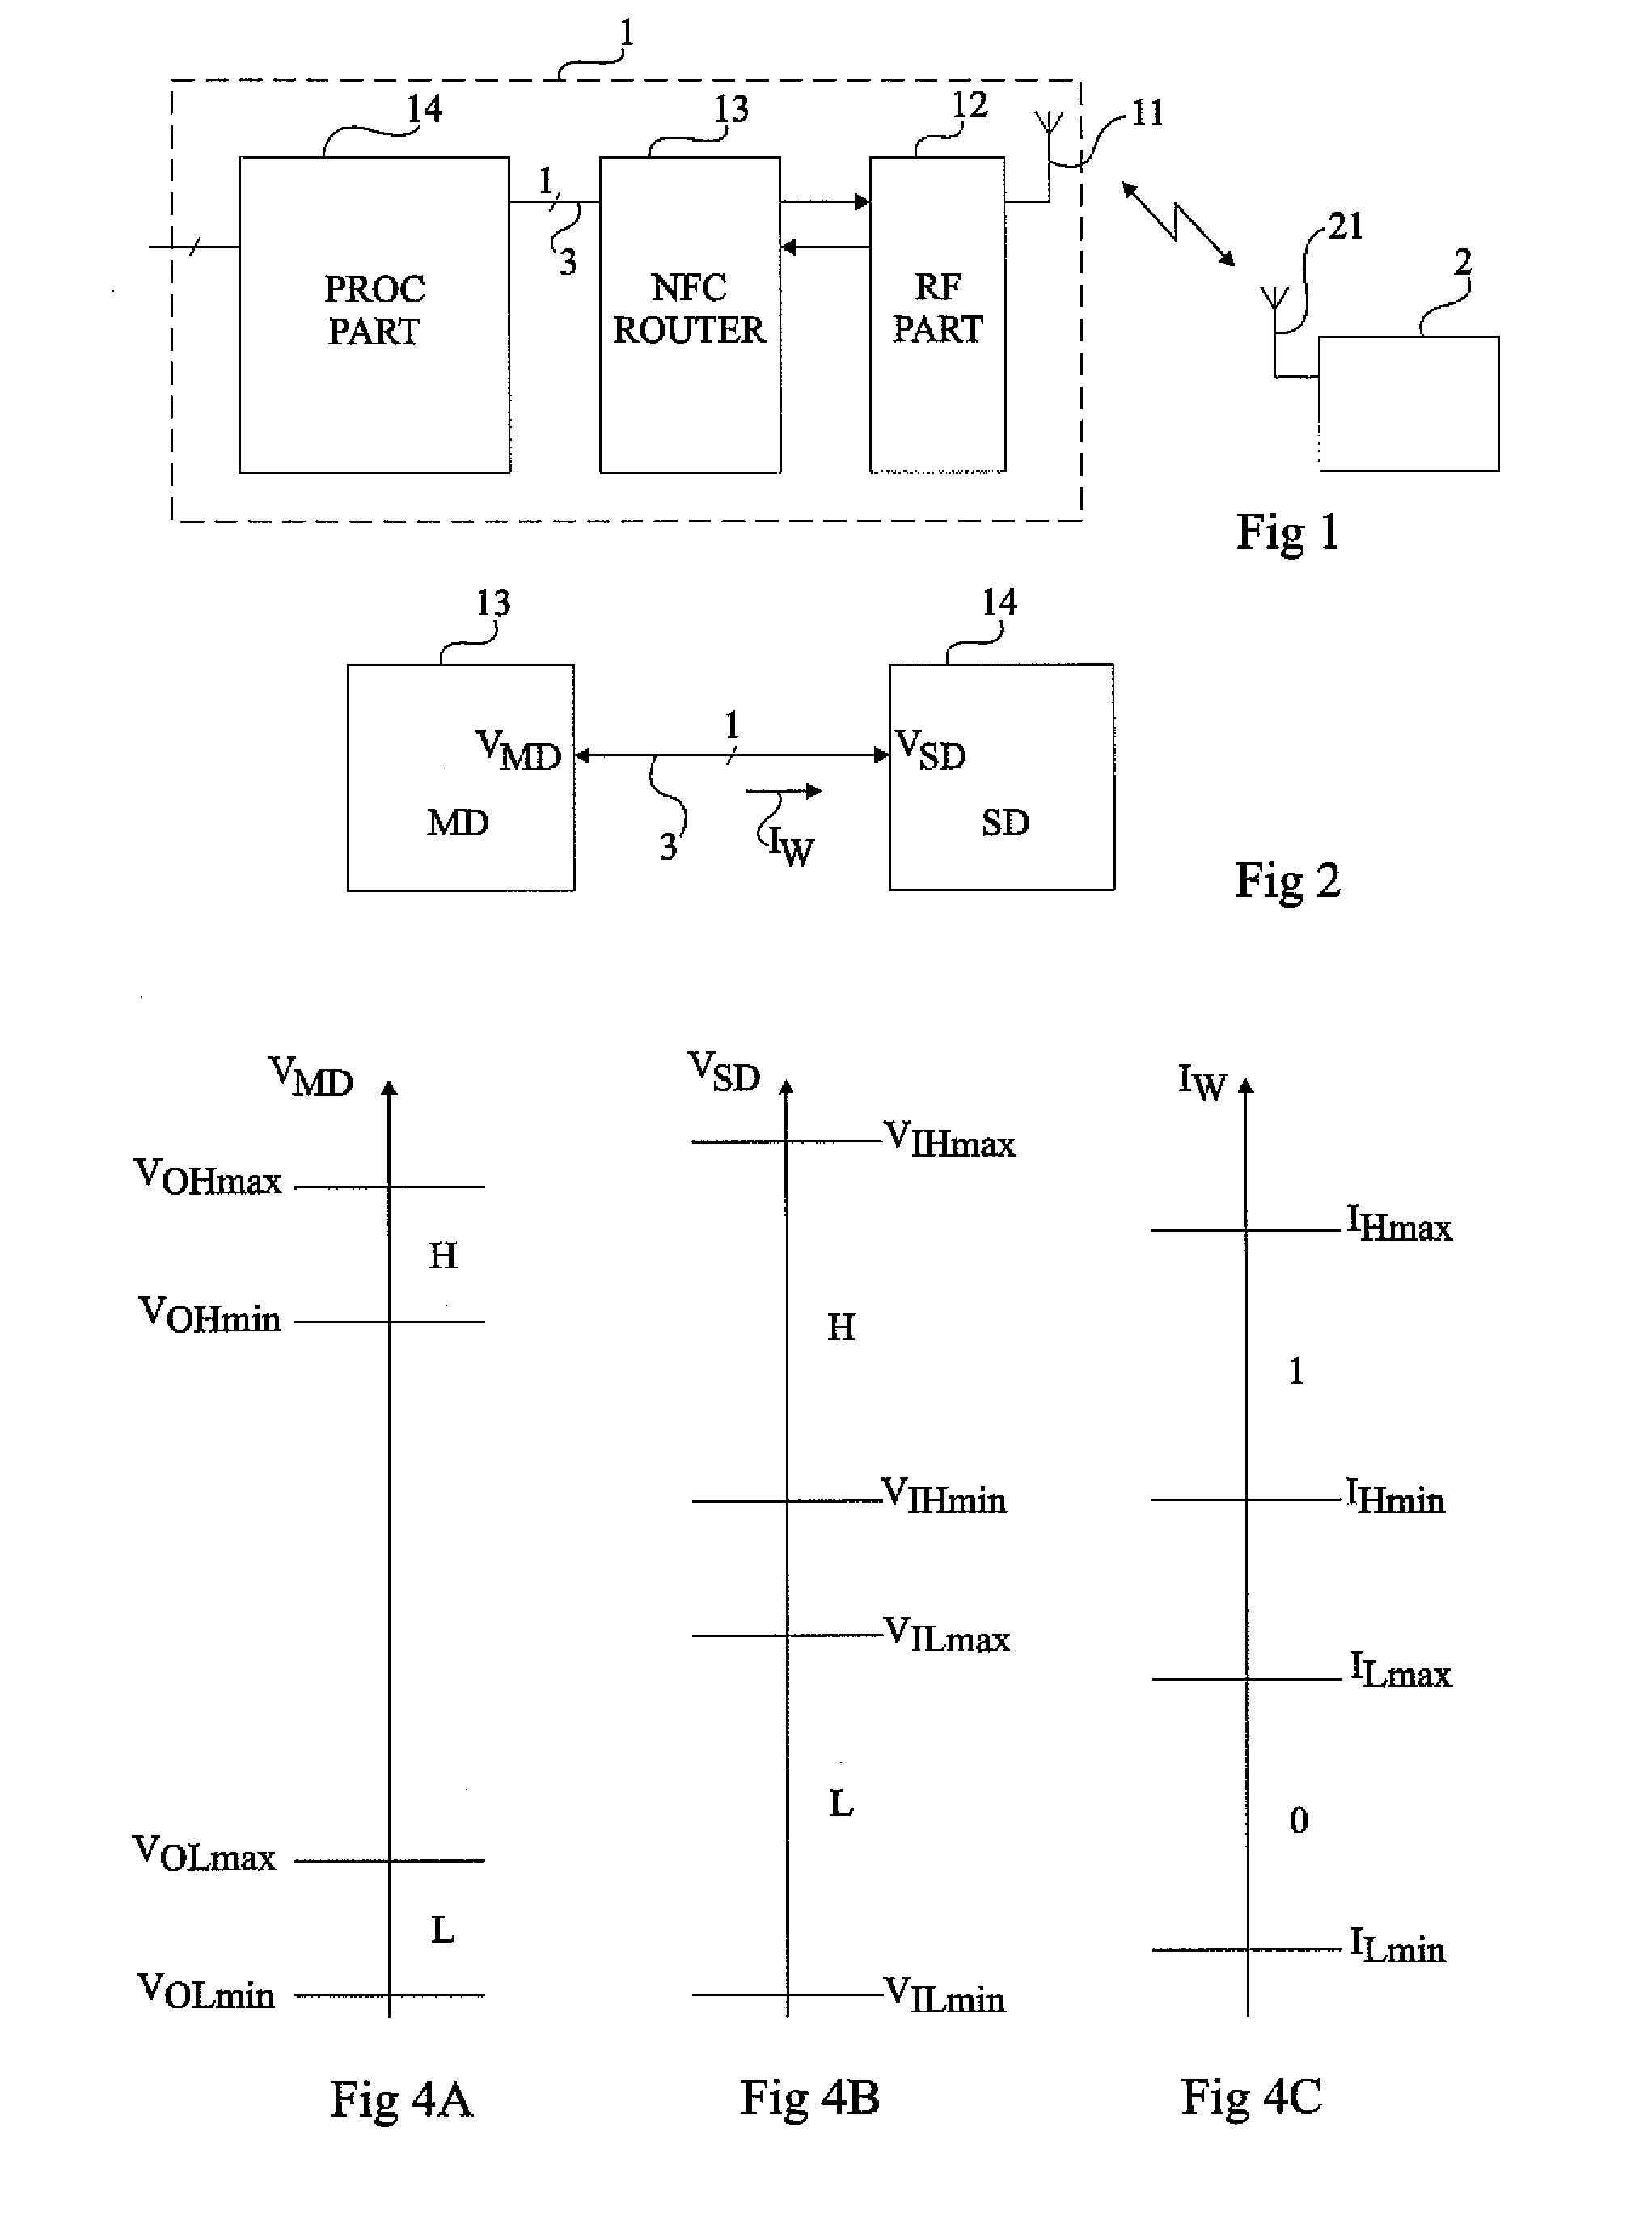 Detection of data received by a master device in a single-wire communication protocol